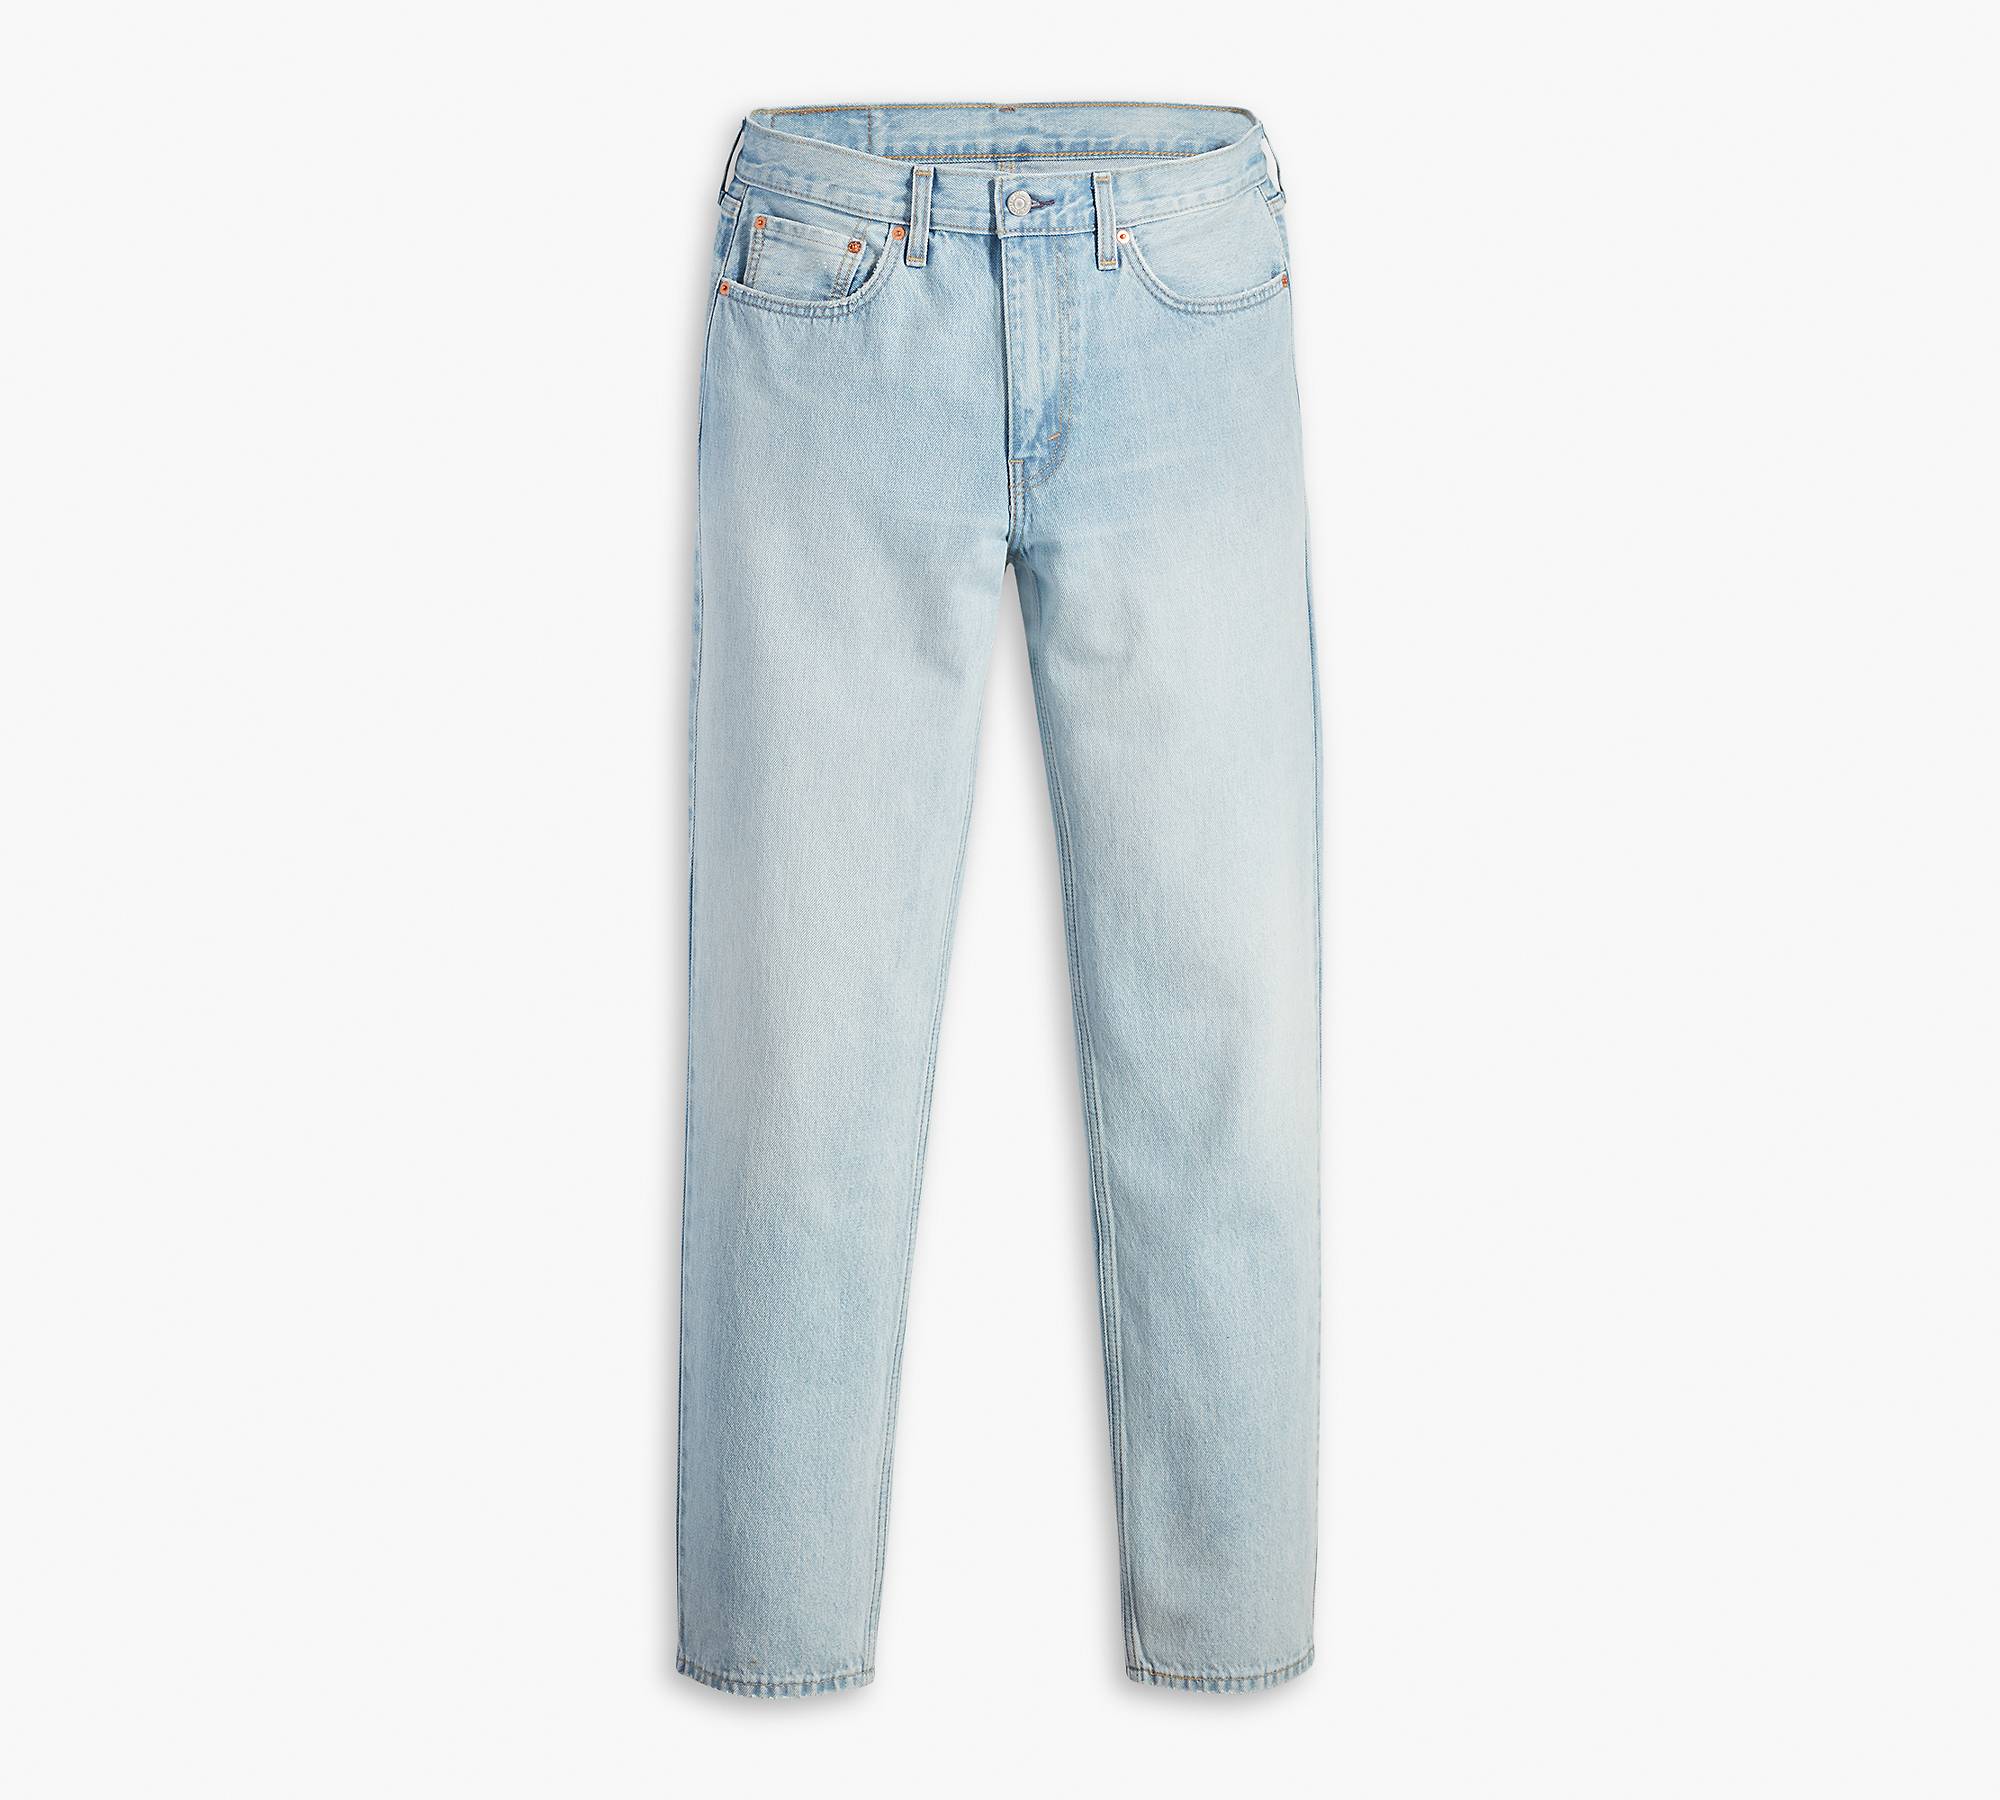 550™ Relaxed Fit Men's Jeans - Light Wash | Levi's® CA